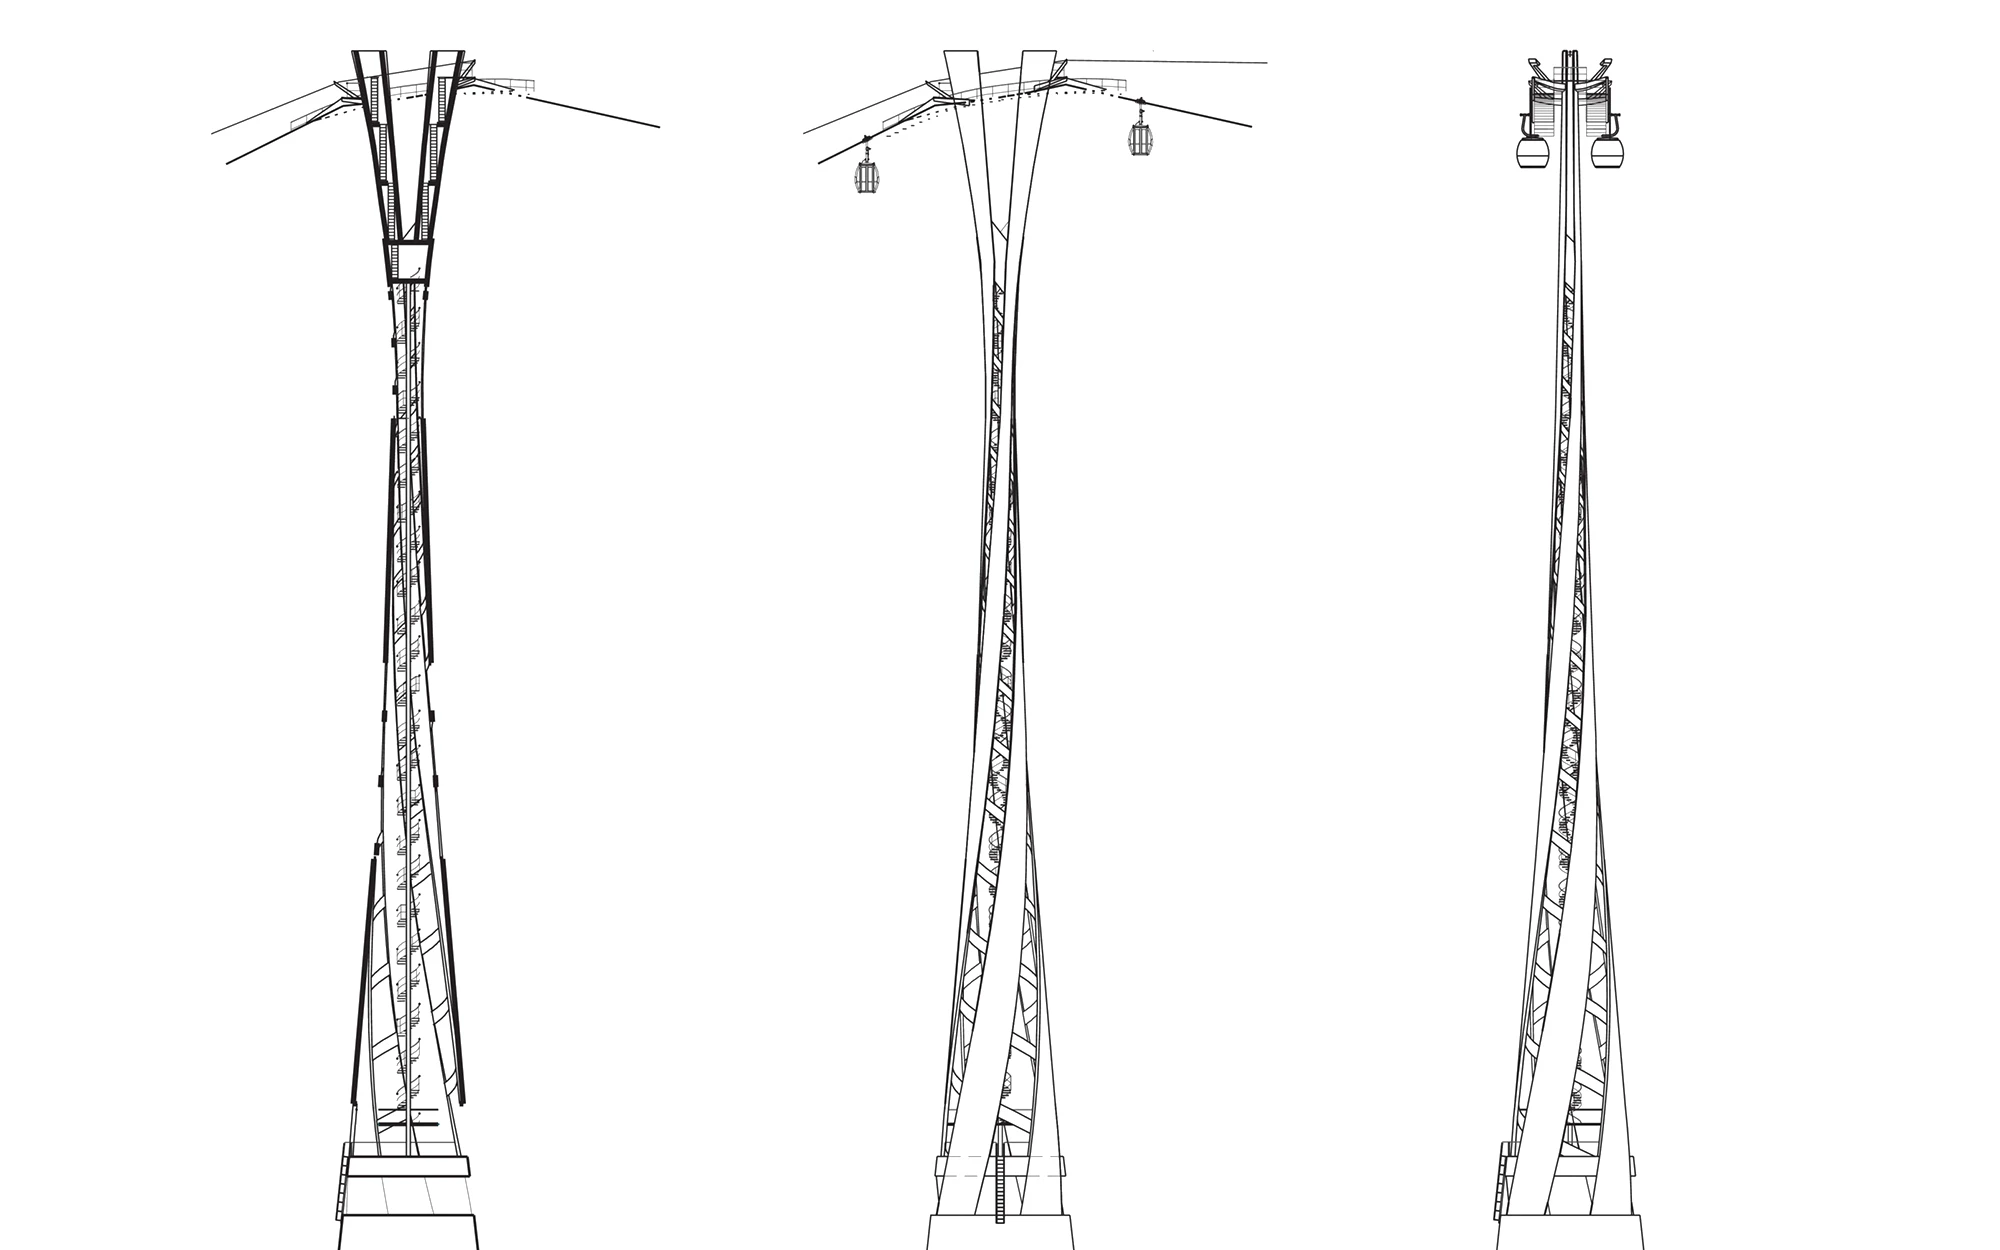 Sketch of Emirates Air Lines Cable Cars